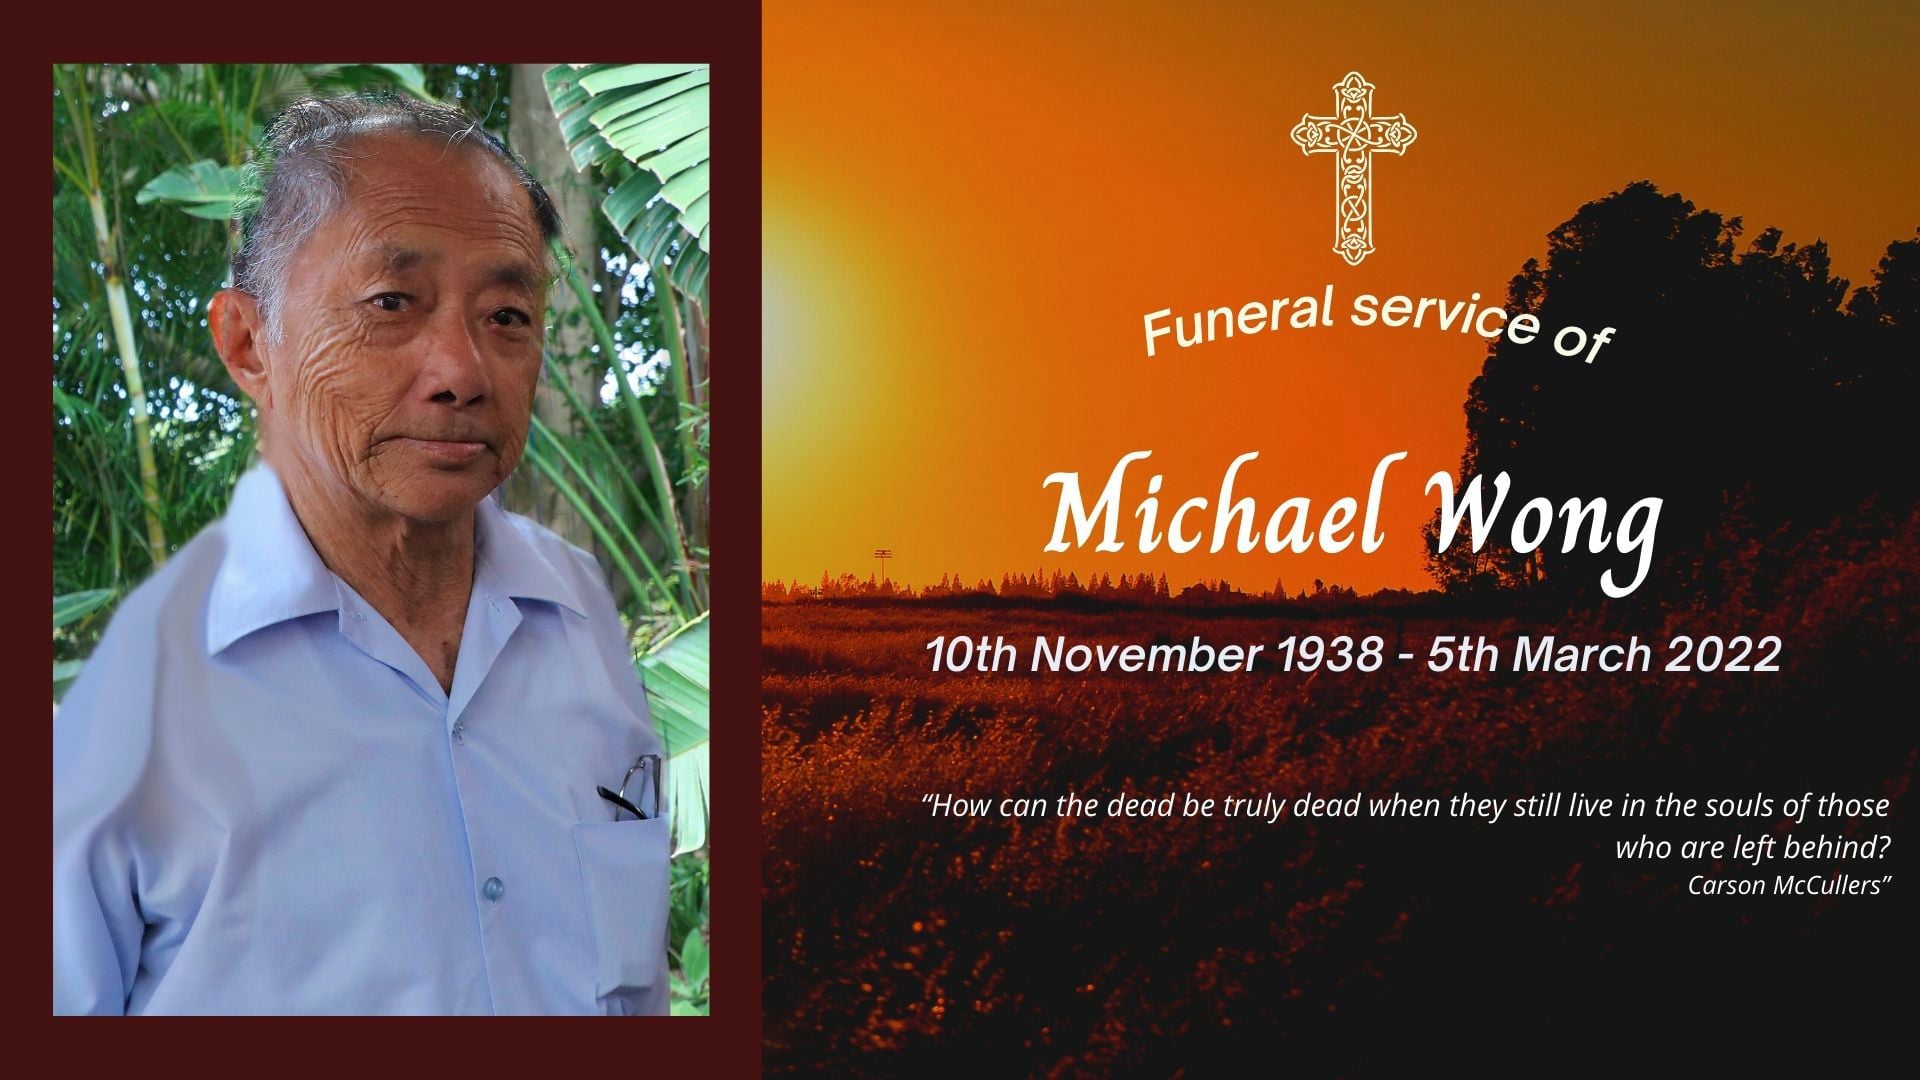 Funeral service of the late Michael Wong - 160322